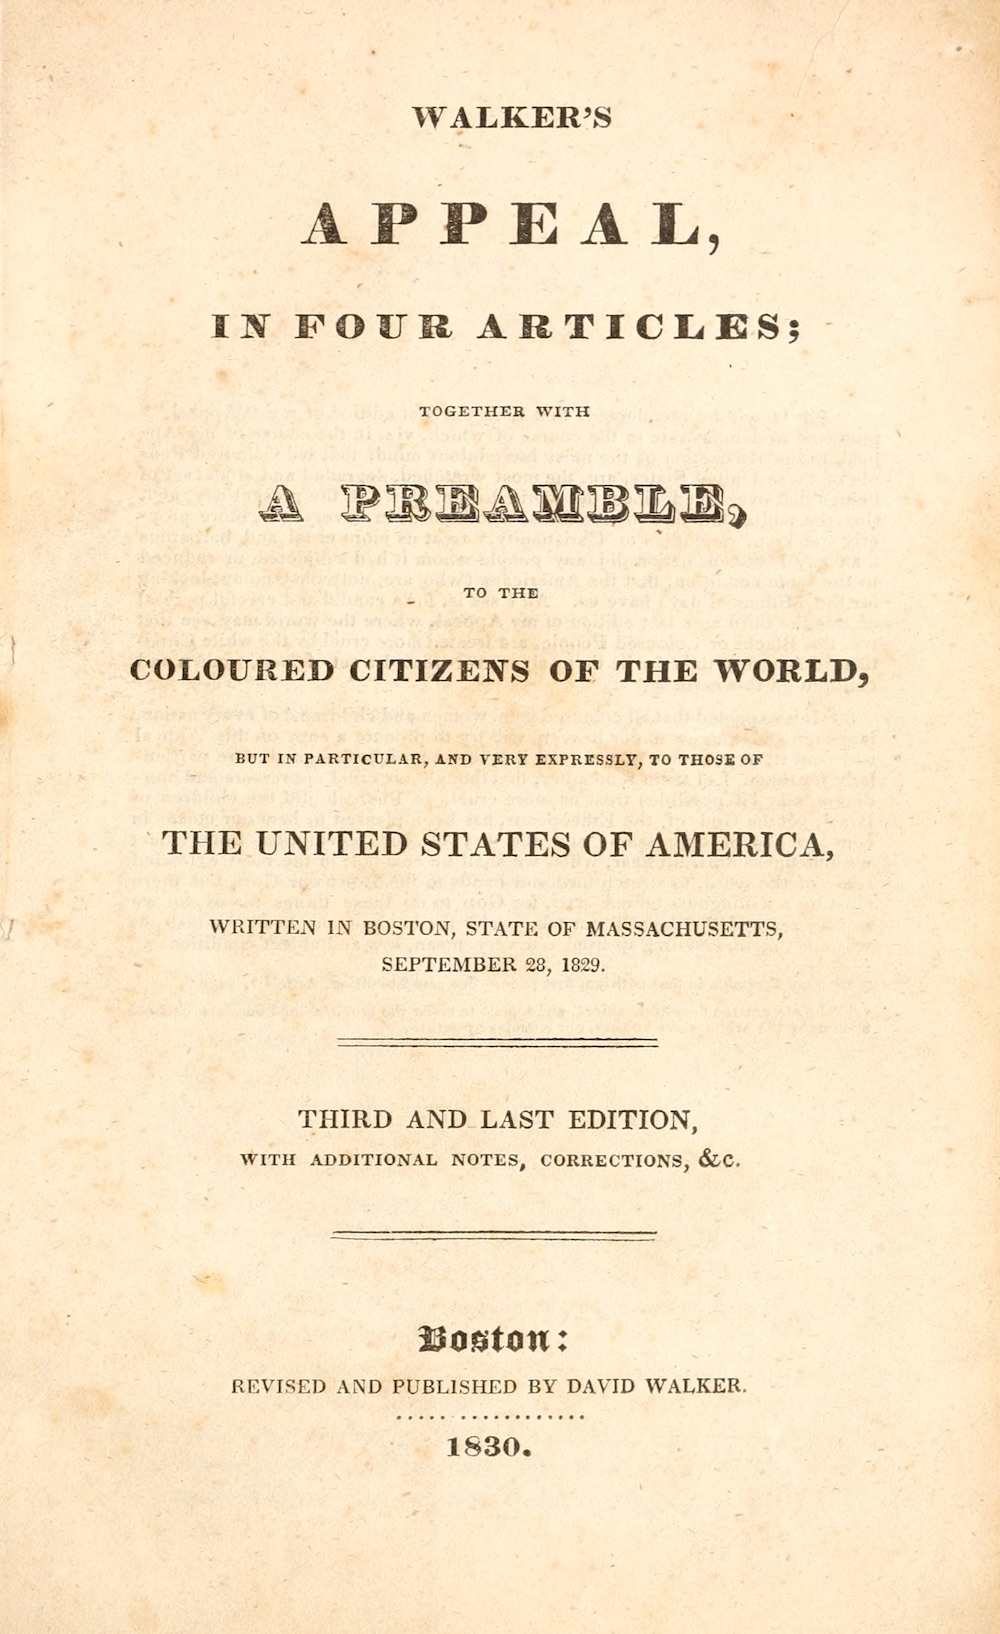 Title page of Walker’s Appeal to the Coloured Citizens of the World, third edition (Boston: 1830).